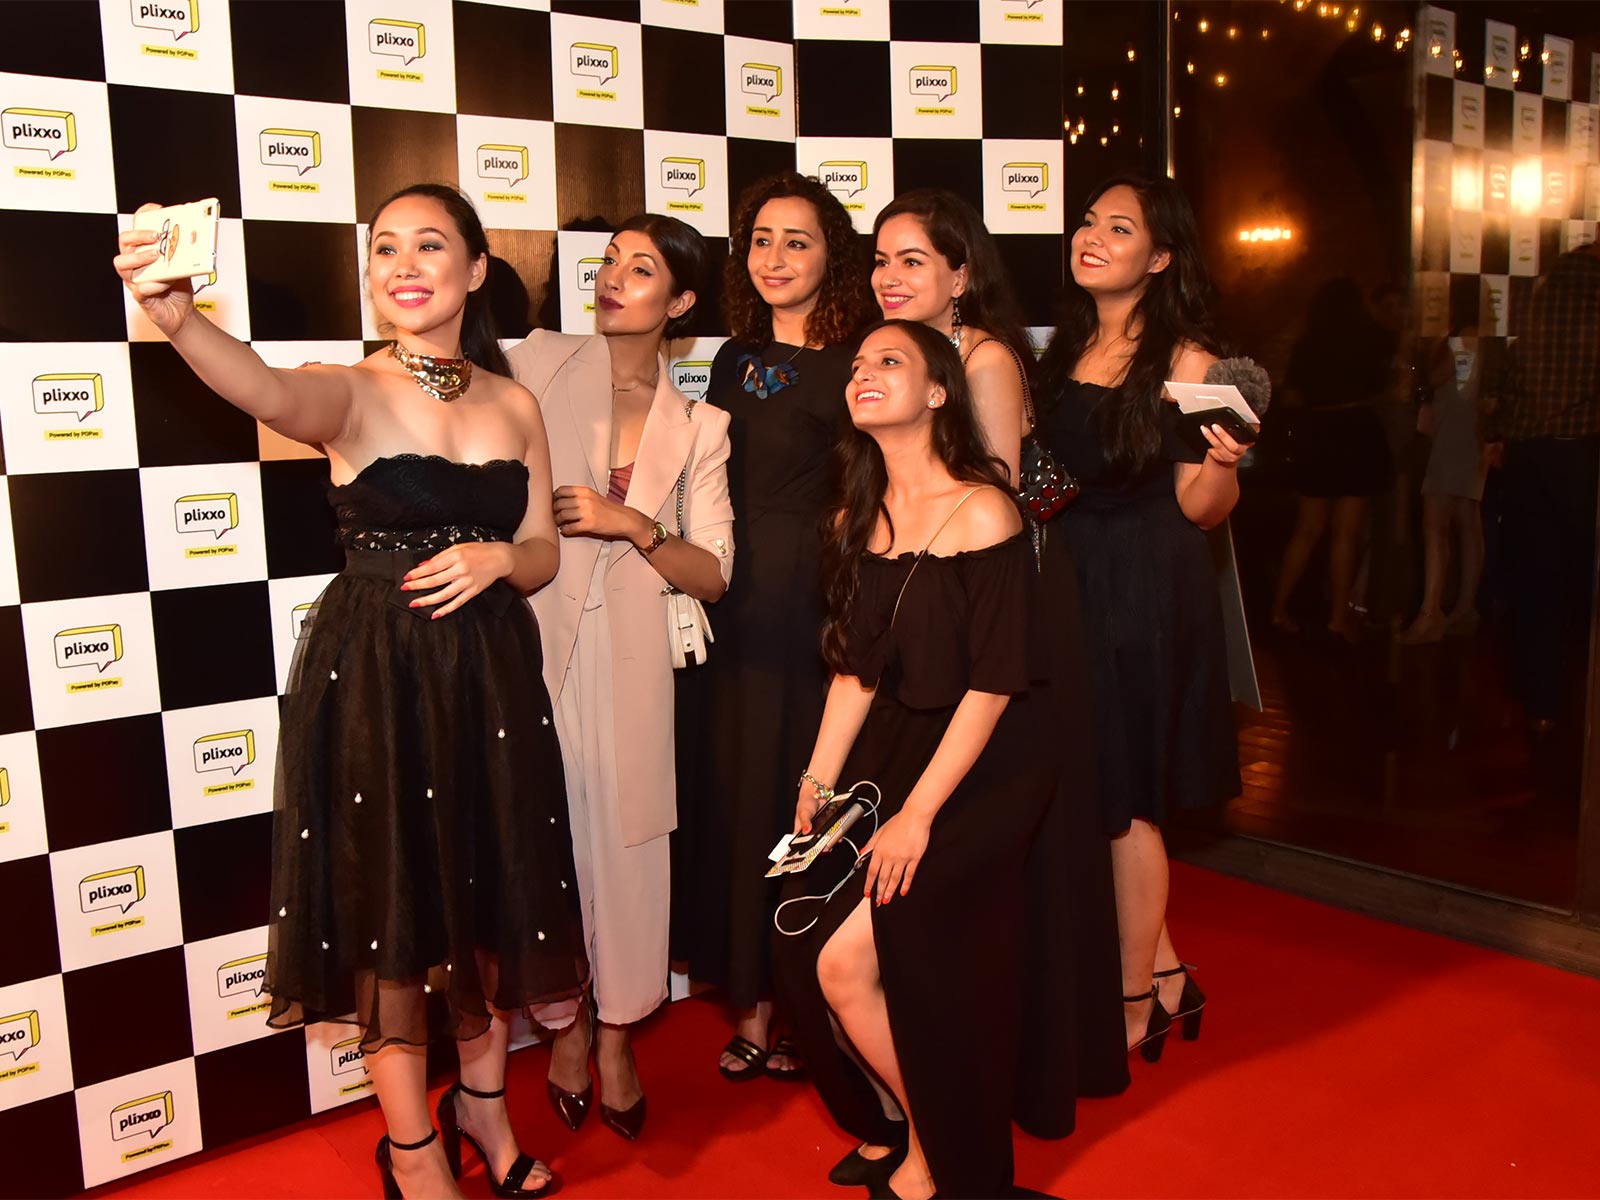 Team POPxo with Priyanka Gill at the Plixxo launch event in Delhi